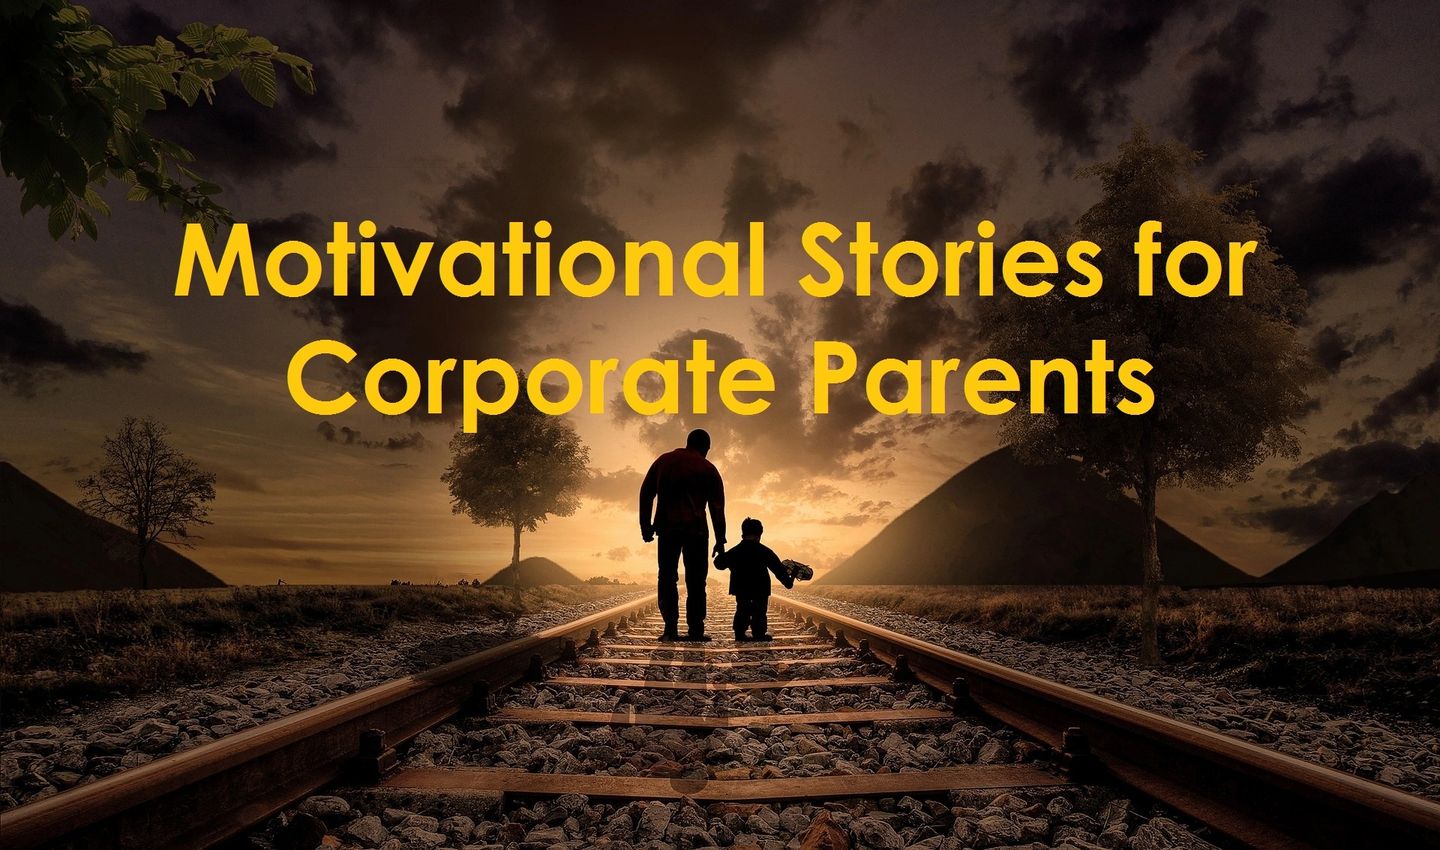 Top 10 motivational stories to read about parenting